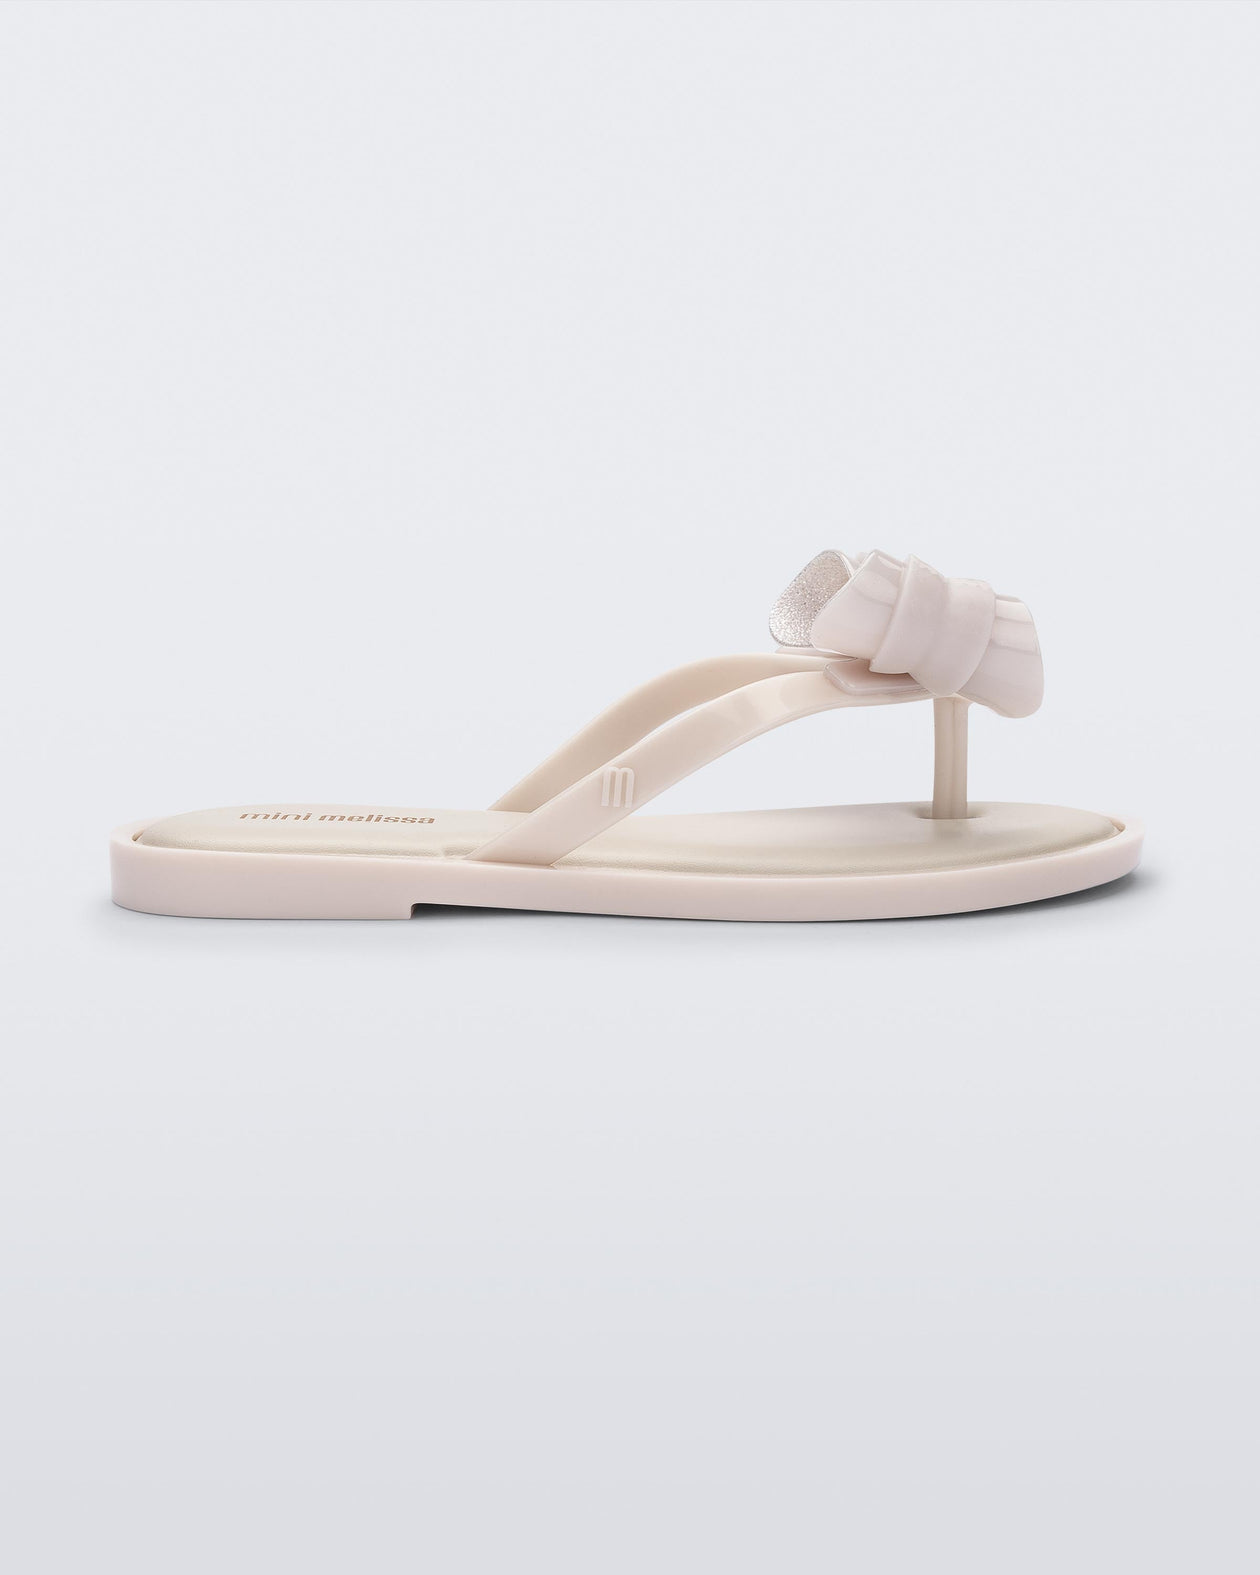 Side view of a Mini Melissa Flip Flop in beige with bow applique